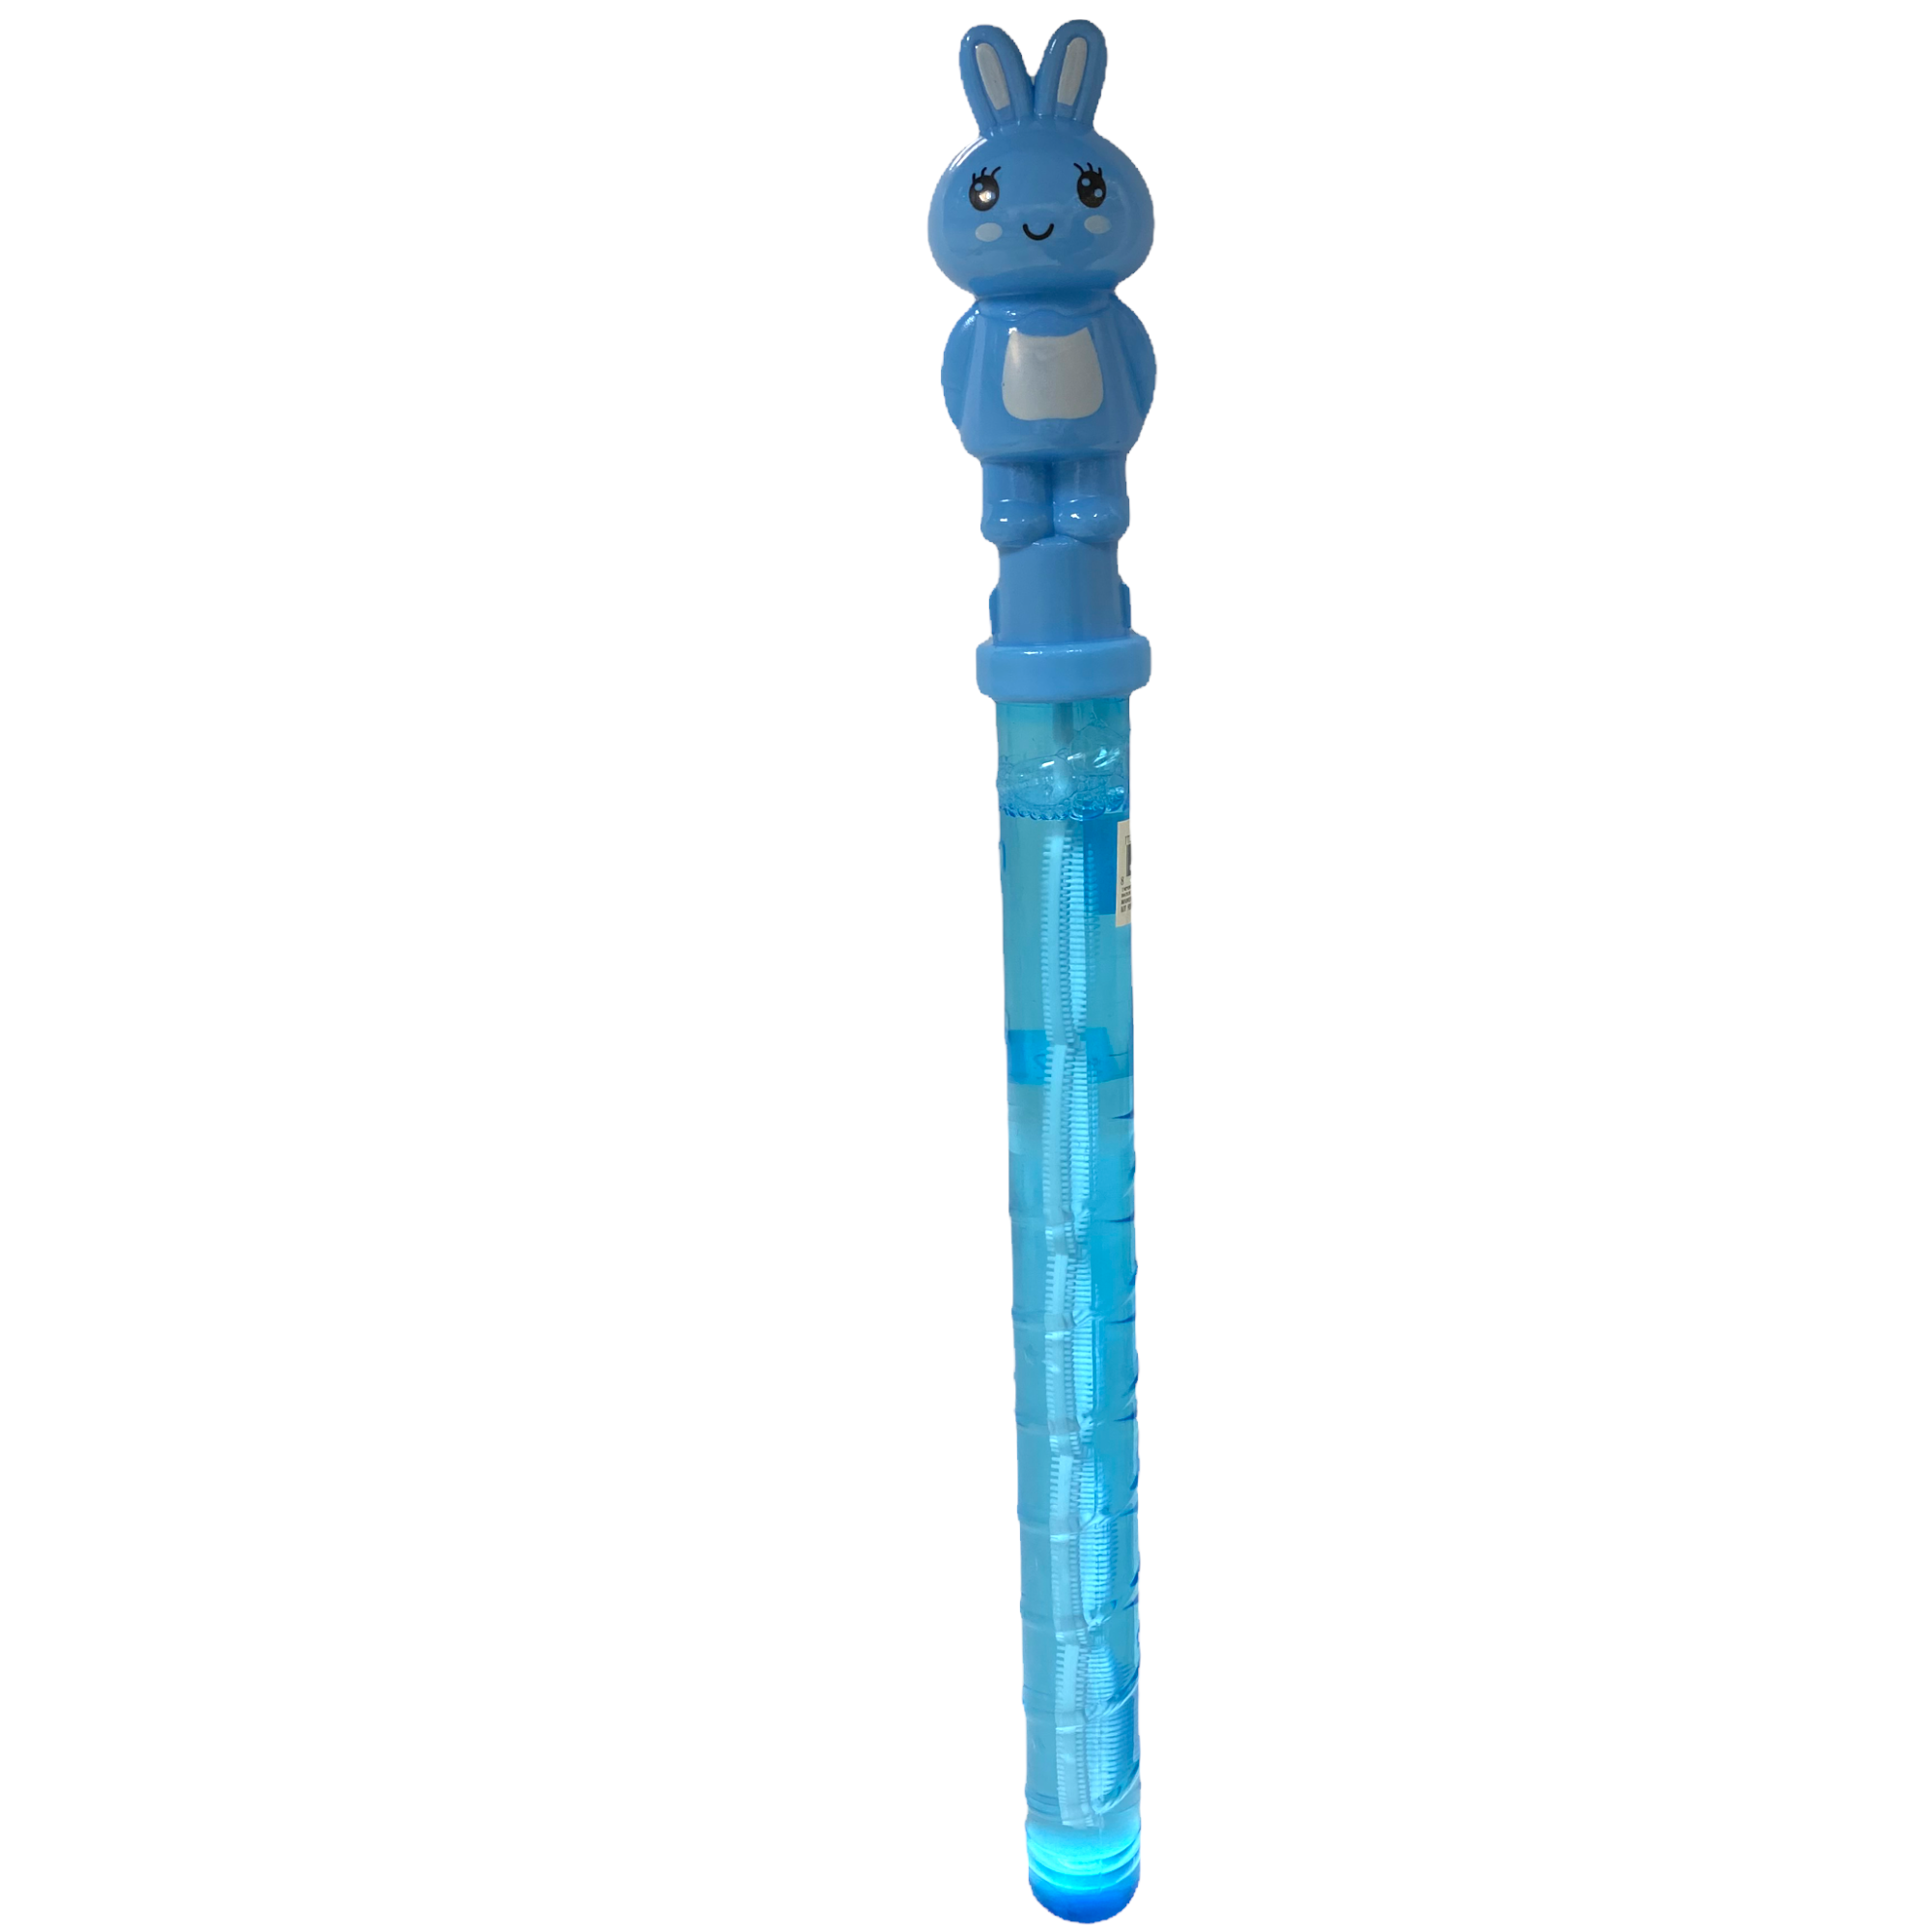 Bunny Bubble Wand Assorted Colors 1ct